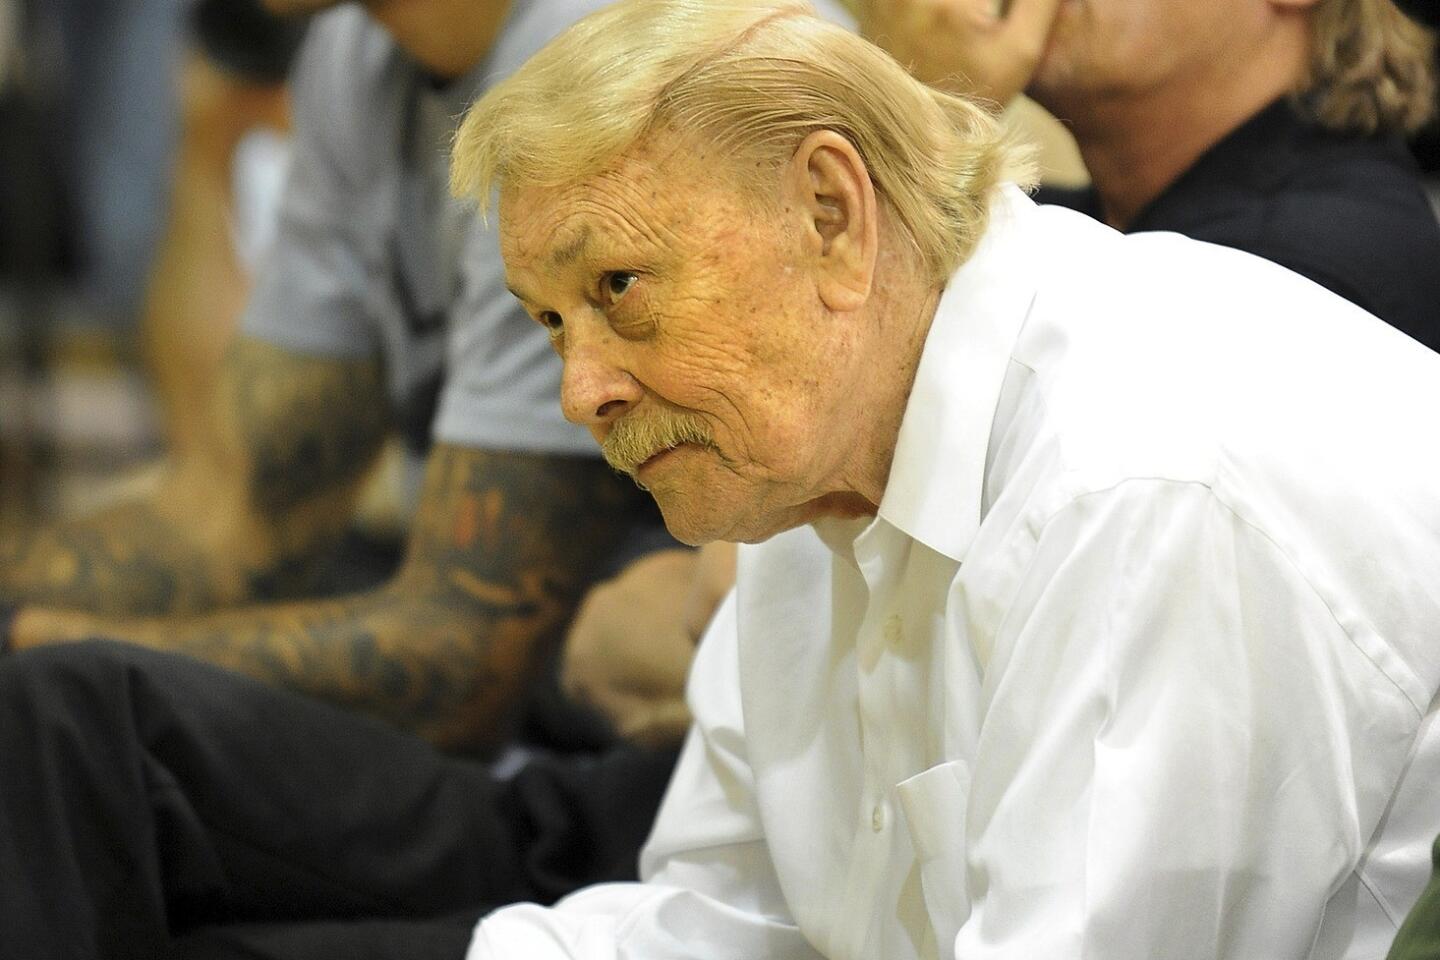 State of the Lakers: Dr. Jerry Buss and Jim Buss